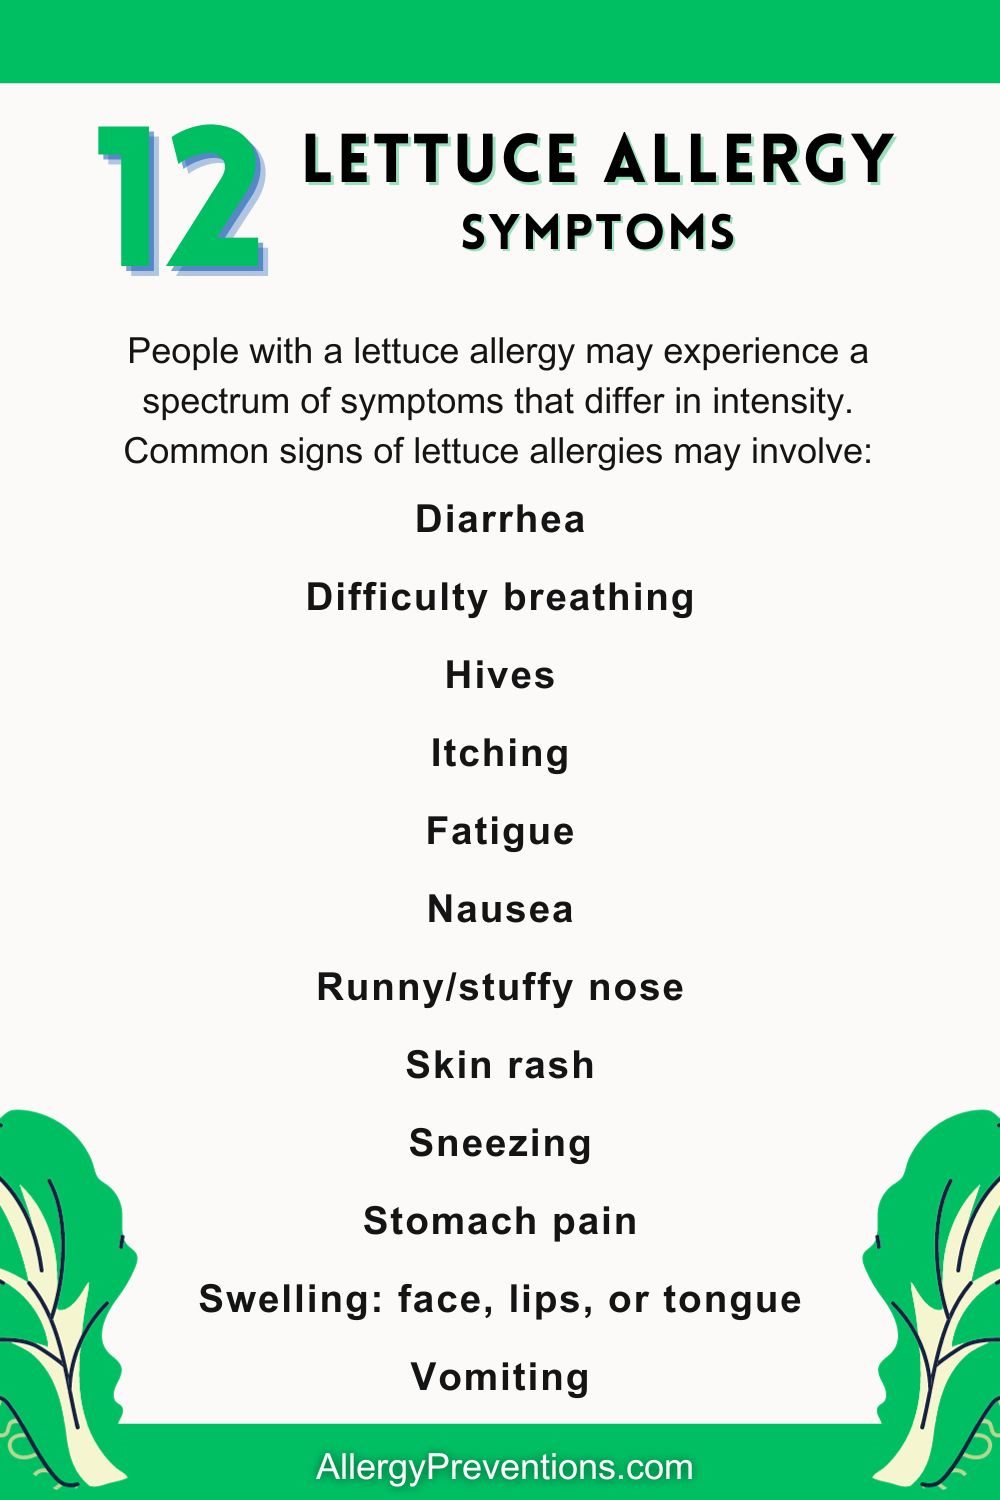 Lettuce allergy symptoms infographic. People with a lettuce allergy may experience a spectrum of symptoms that differ in intensity. Common signs of lettuce allergies may involve: Diarrhea, Difficulty breathing, Hives, Itching, Fatigue, Nausea, Runny/stuffy nose, Skin rash, Sneezing, Stomach pain, Swelling: face, lips, or tongue, Vomiting.